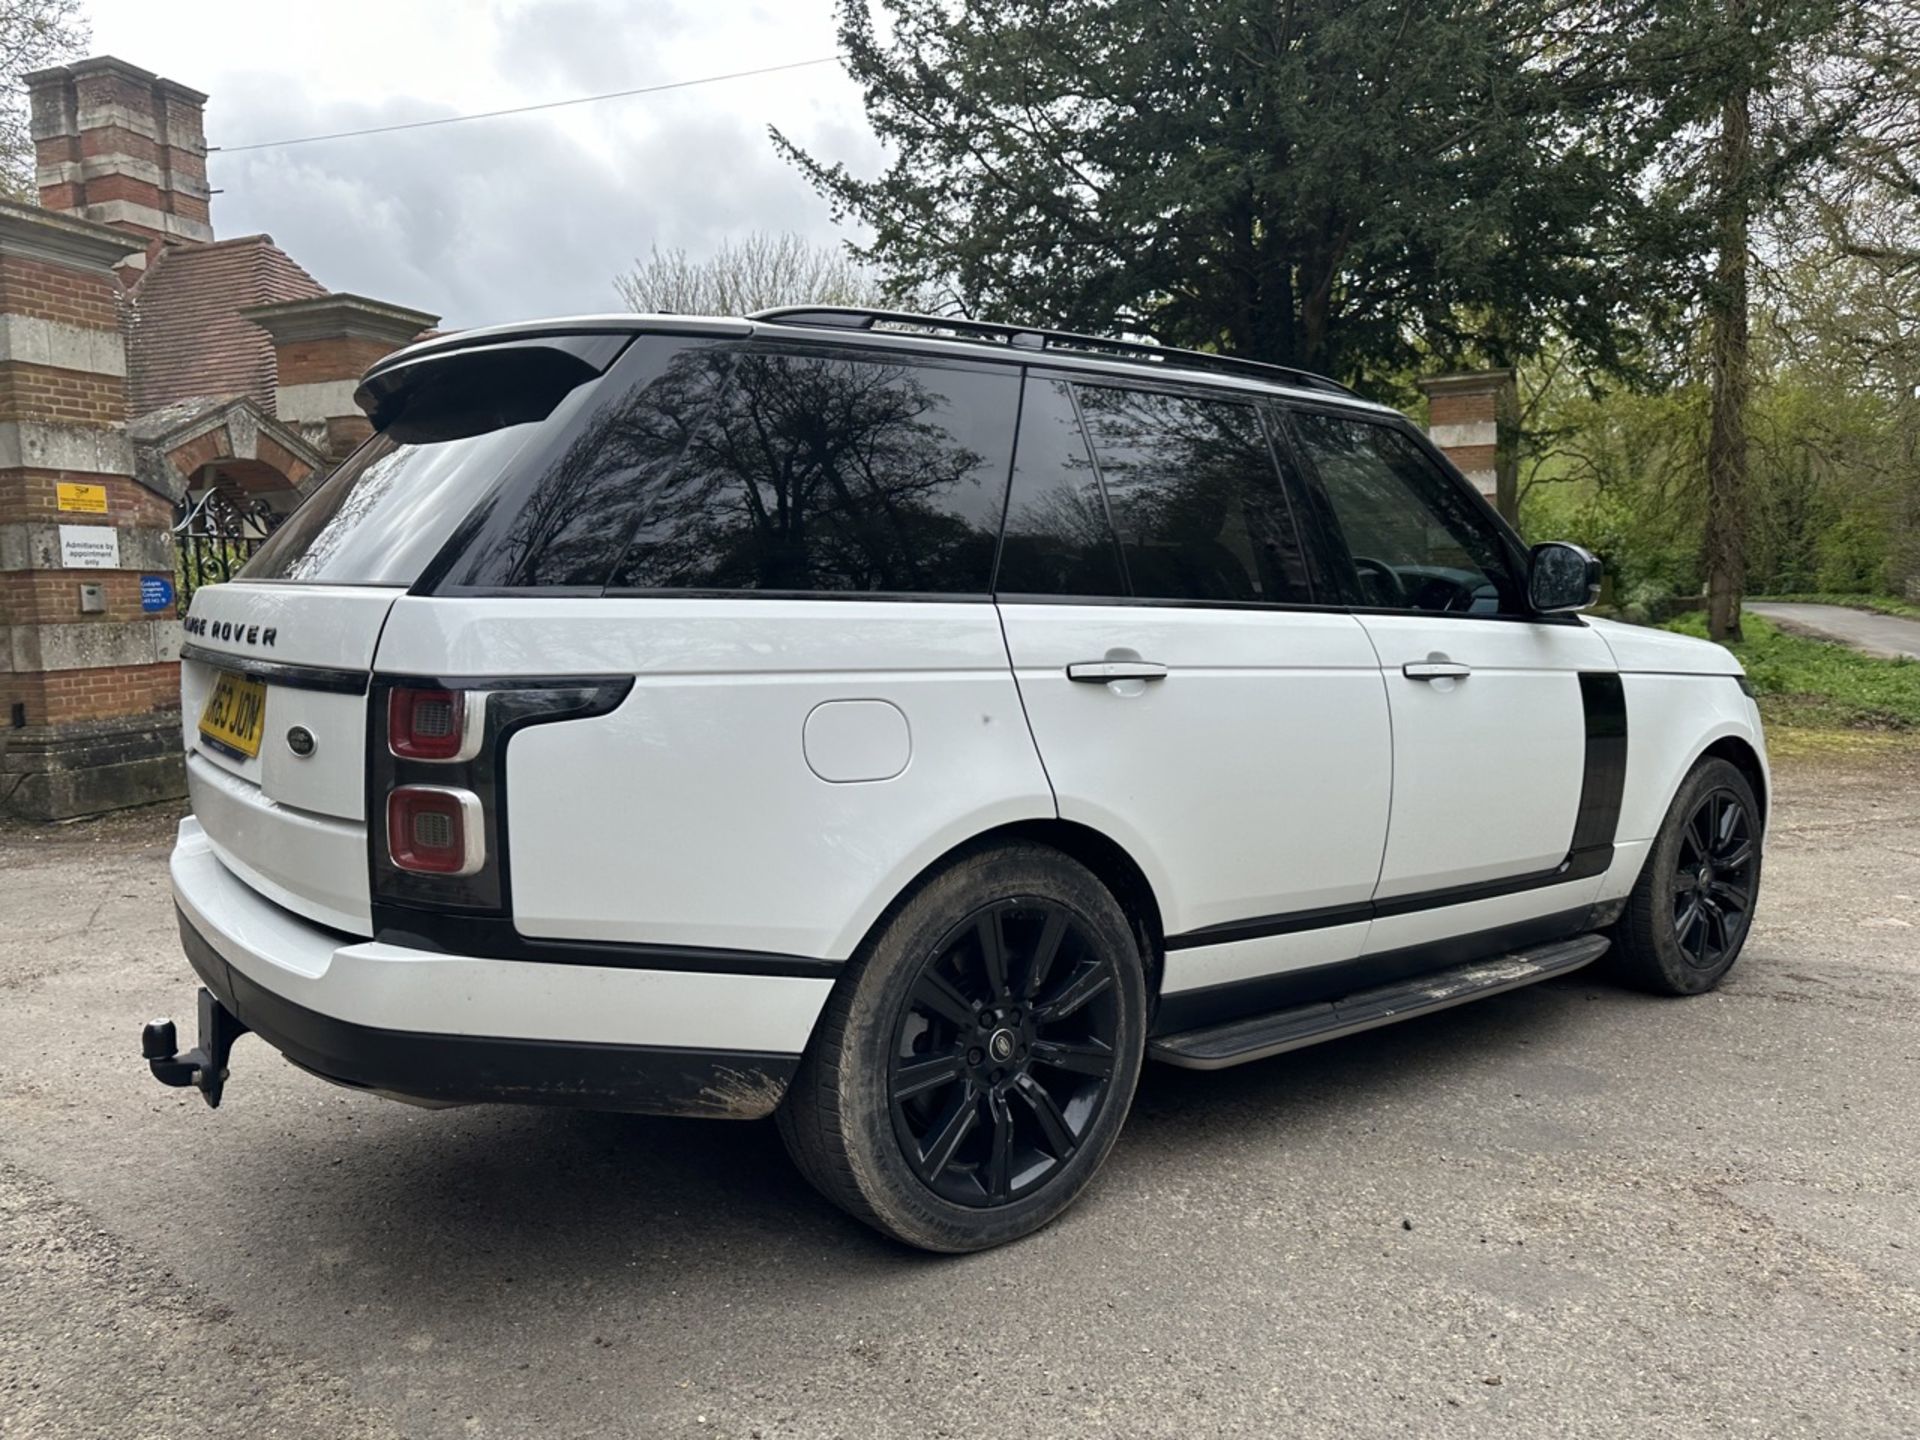 LAND ROVER RANGE ROVER 2.0 P400e Autobiography 4dr Auto - Automatic - 2018 - 31k miles - FULL SH - Image 8 of 32